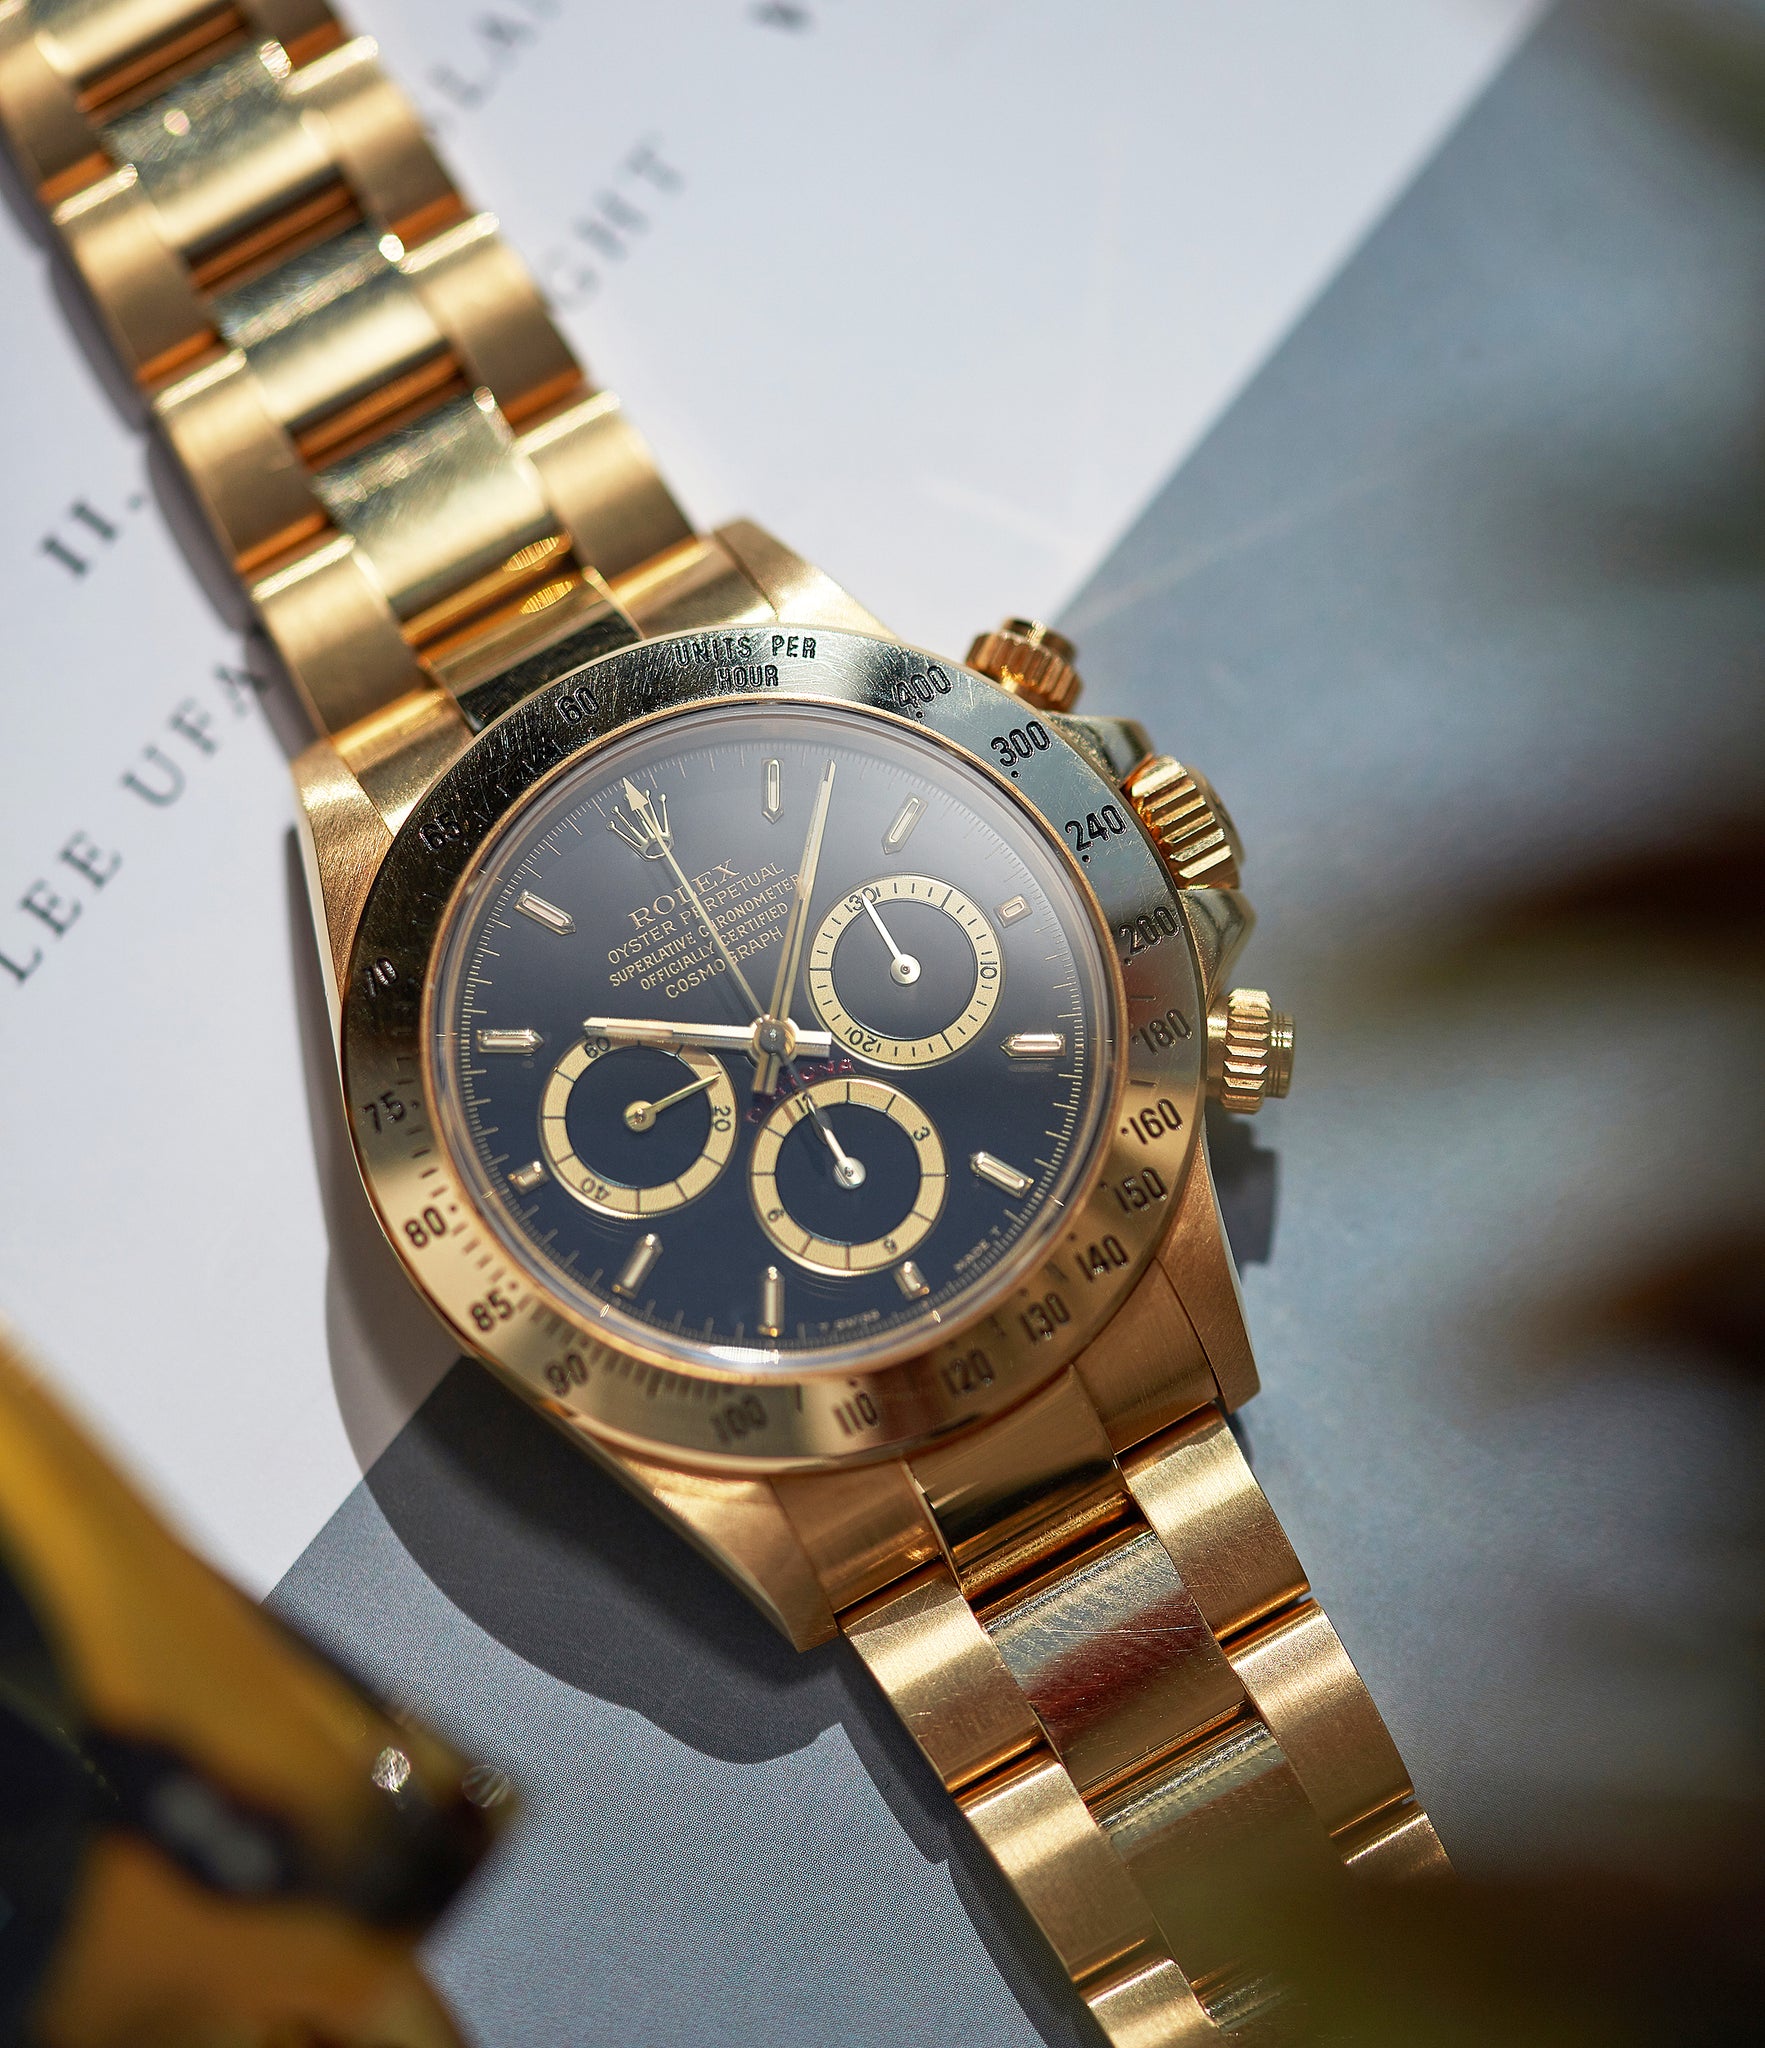 shop vintage Rolex Daytona Zenith 16528 yellow gold black dial full set watch for sale online at A Collected Man London UK specialist of rare watches